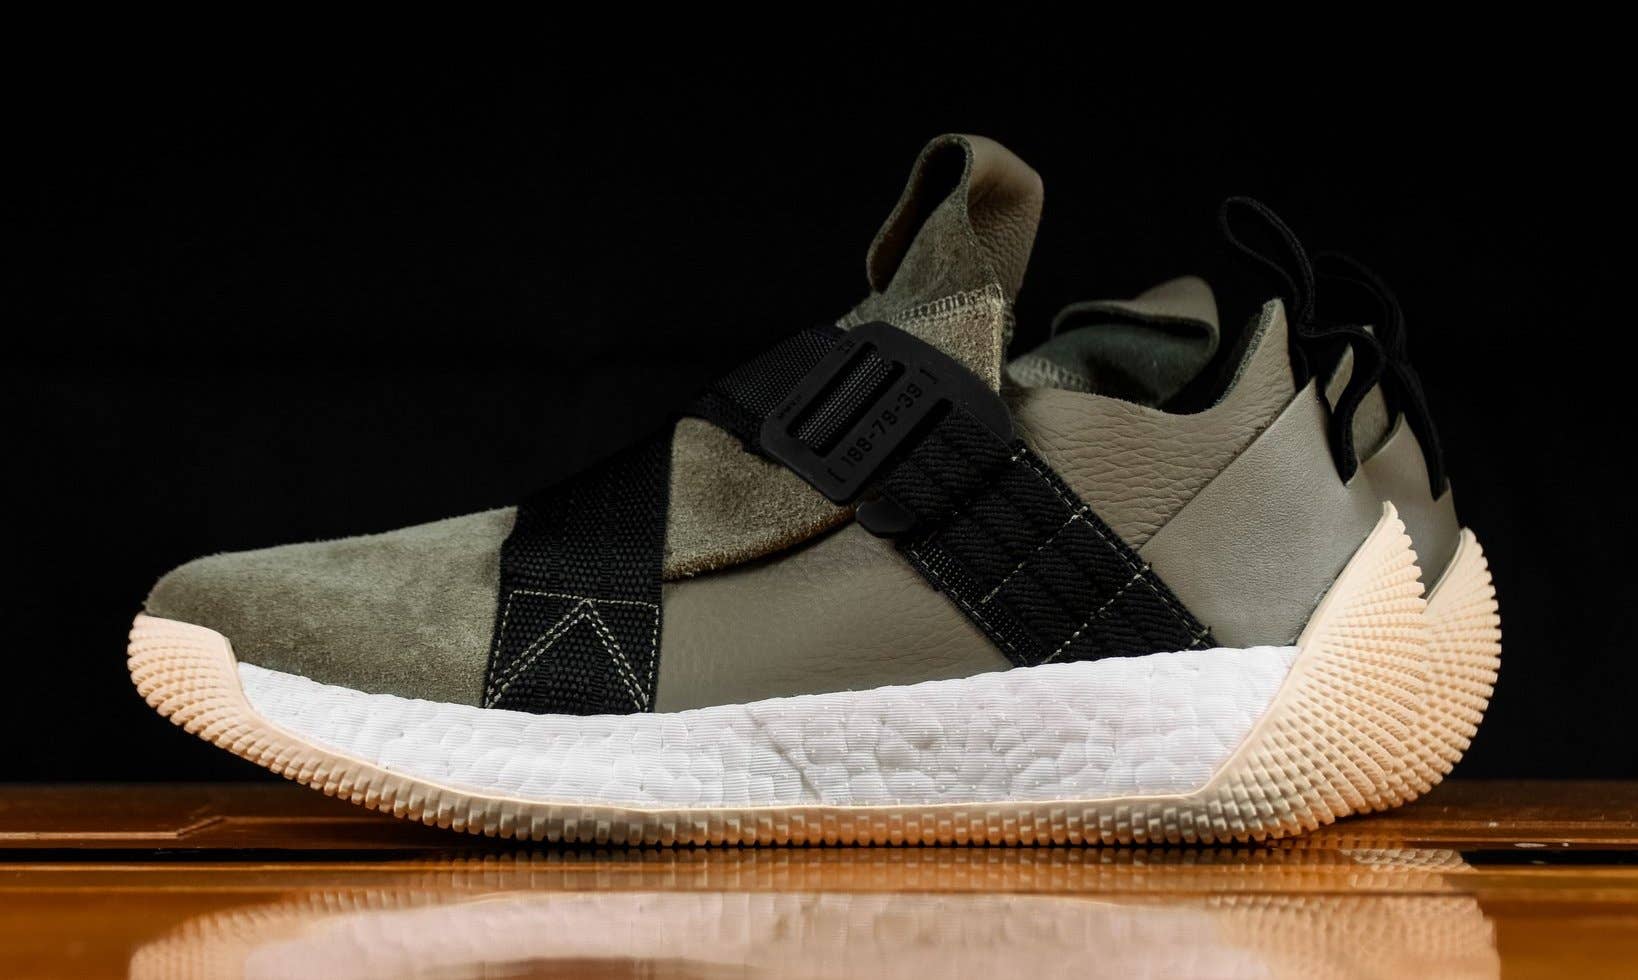 Adidas Harden LS 2 Buckle Olive Release Date AQ0020 Profile